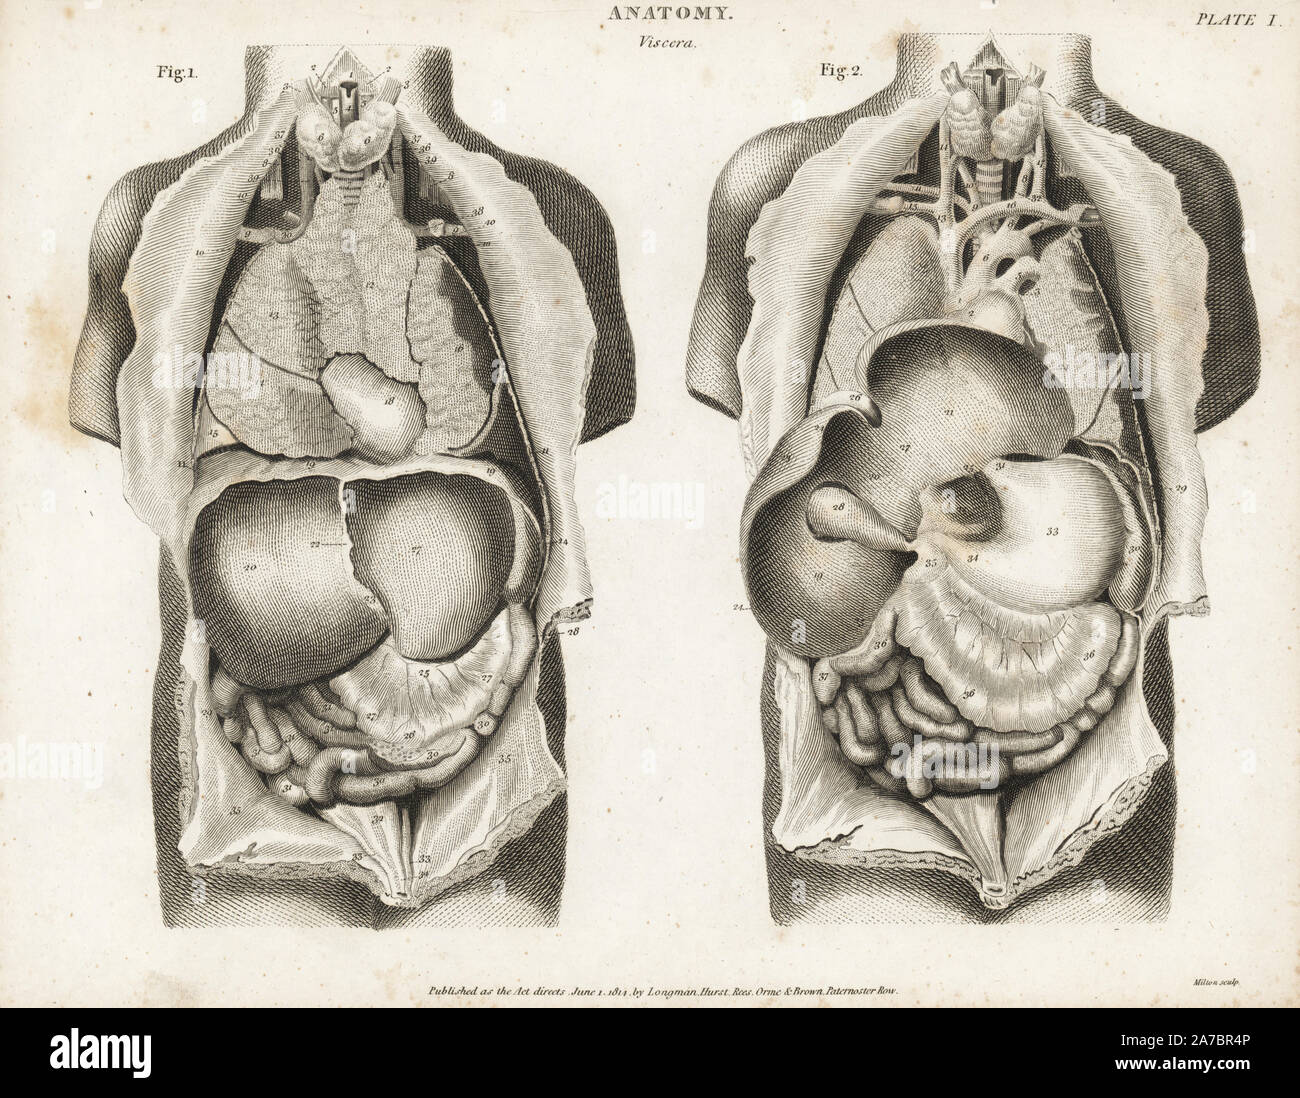 Anatomy of human internal organs from the back showing stomach, liver, intestines, gallbladder, etc. Copperplate engraving by Milton from Abraham Rees' Cyclopedia or Universal Dictionary of Arts, Sciences and Literature, Longman, Hurst, Rees, Orme and Brown, London, 1820. Stock Photo